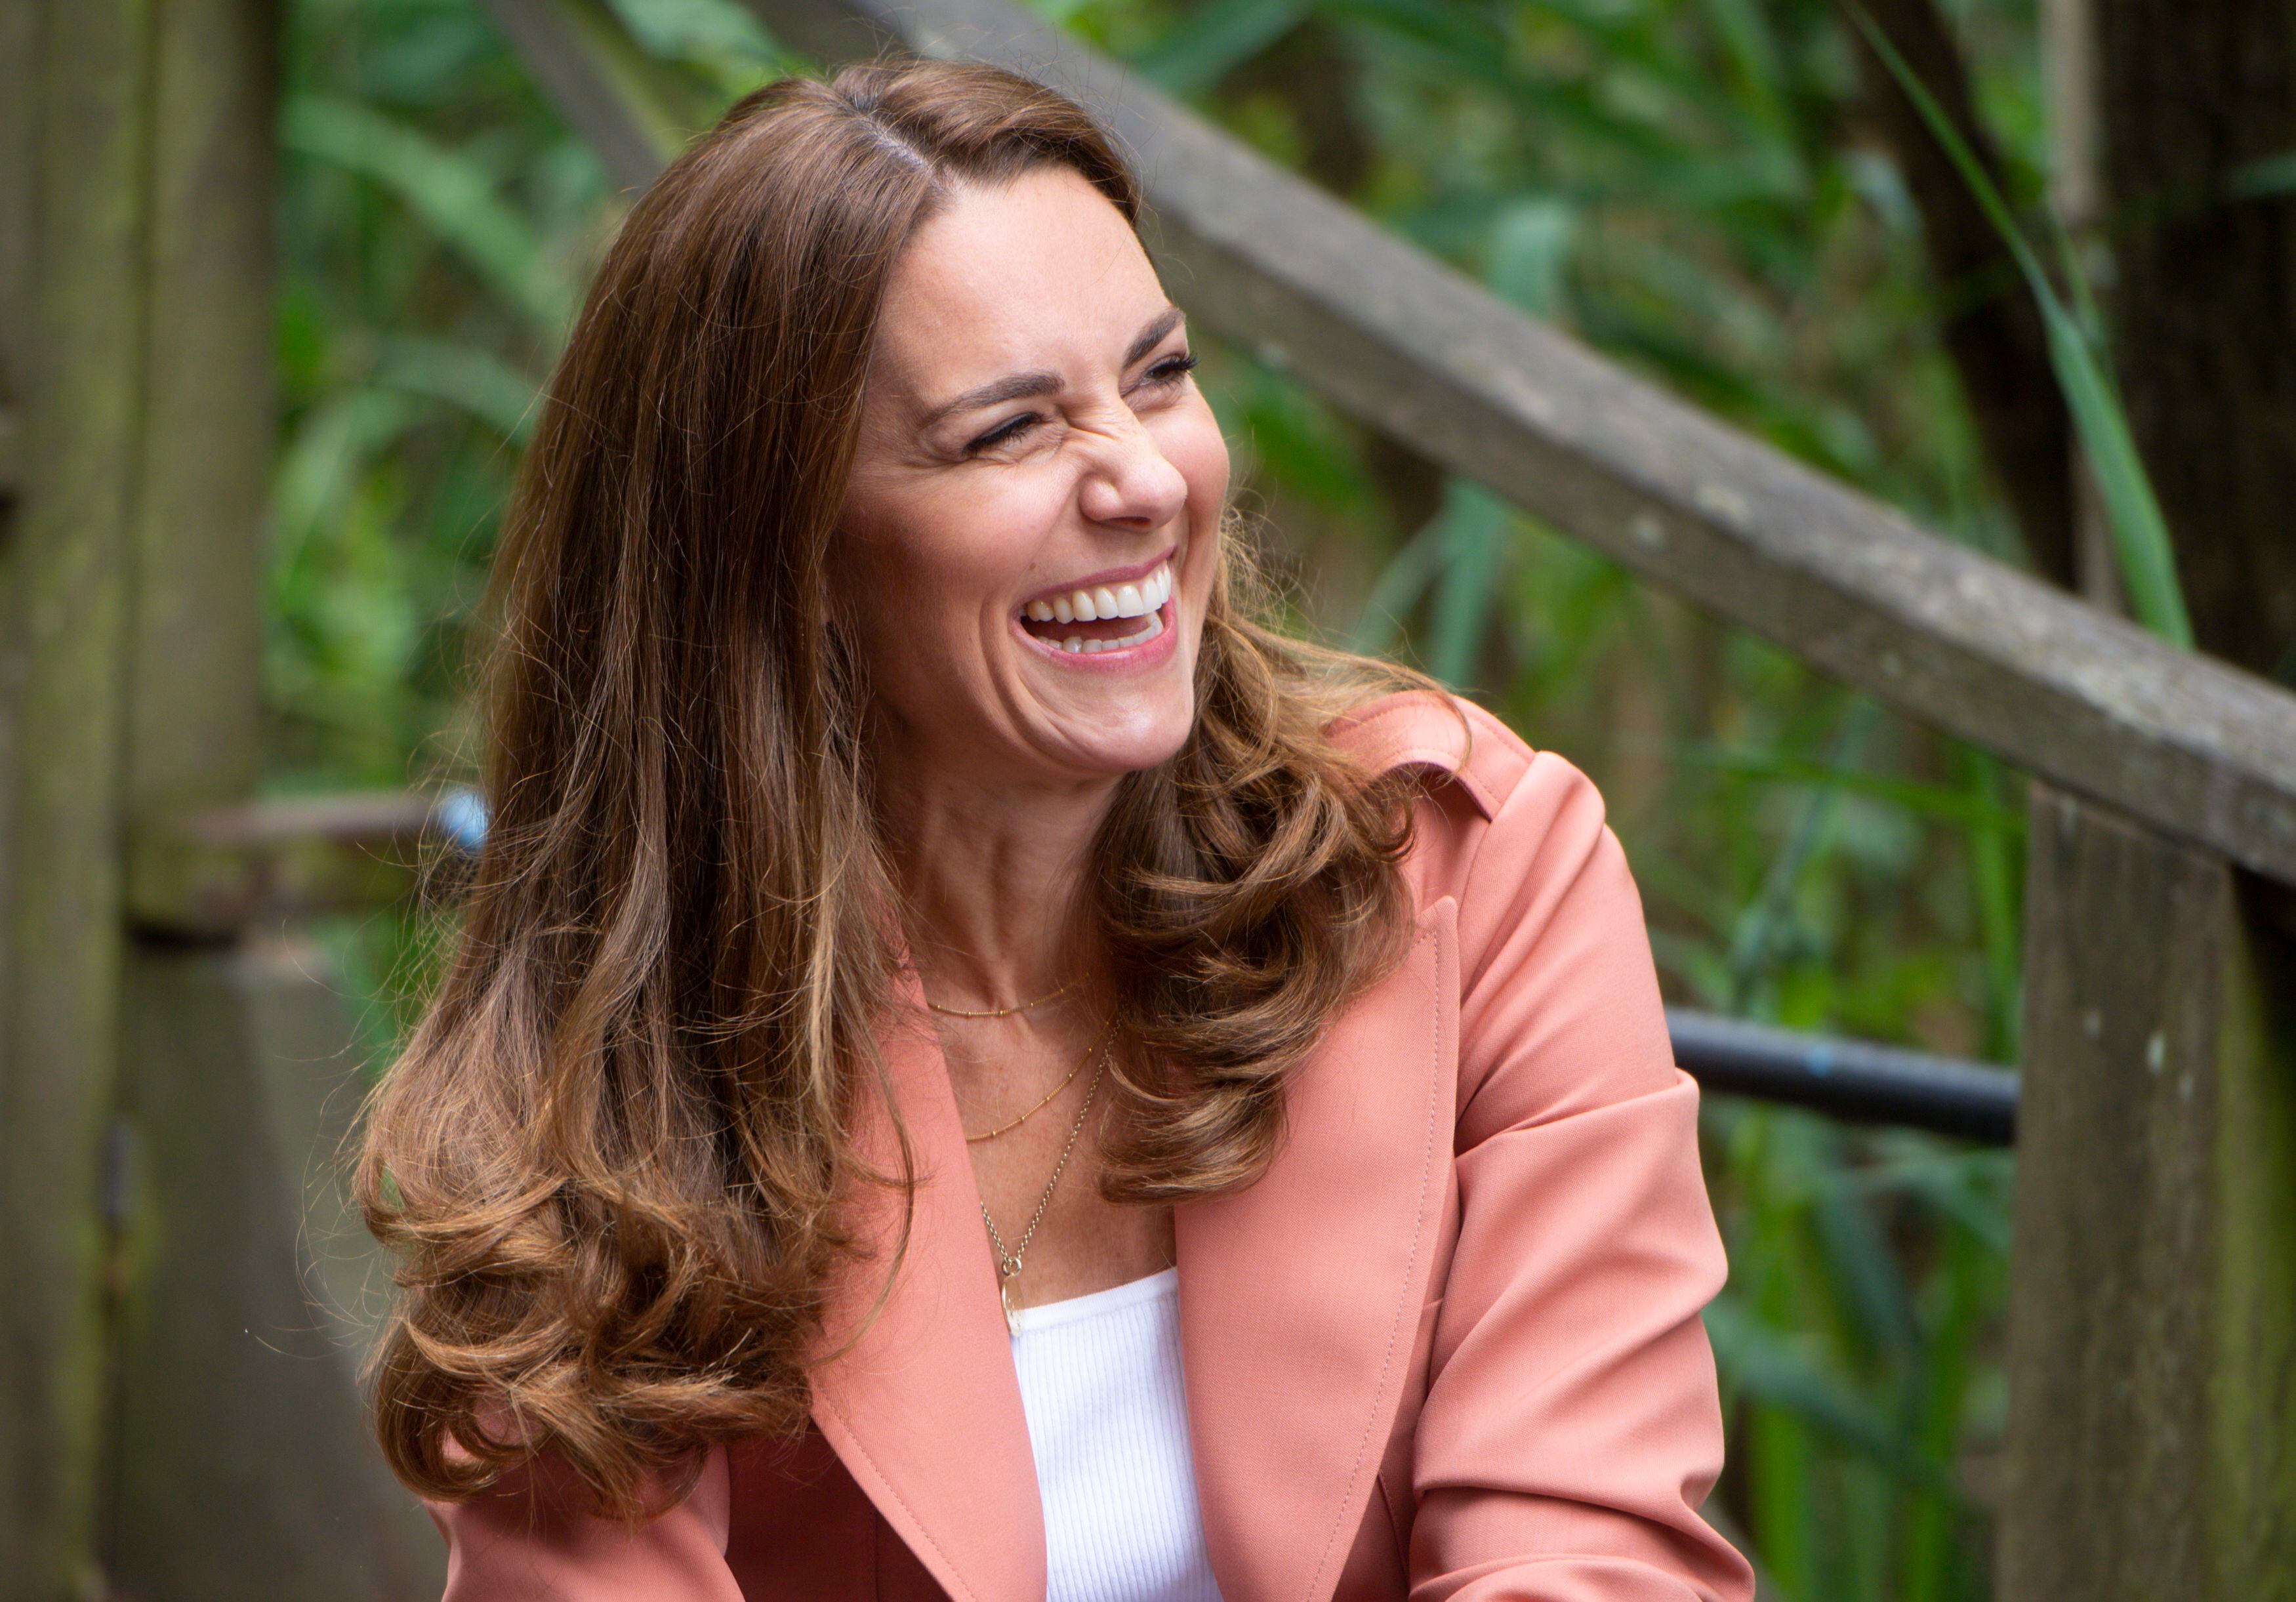 6 Times Kate Middleton Rocked Casual, Commoner Style